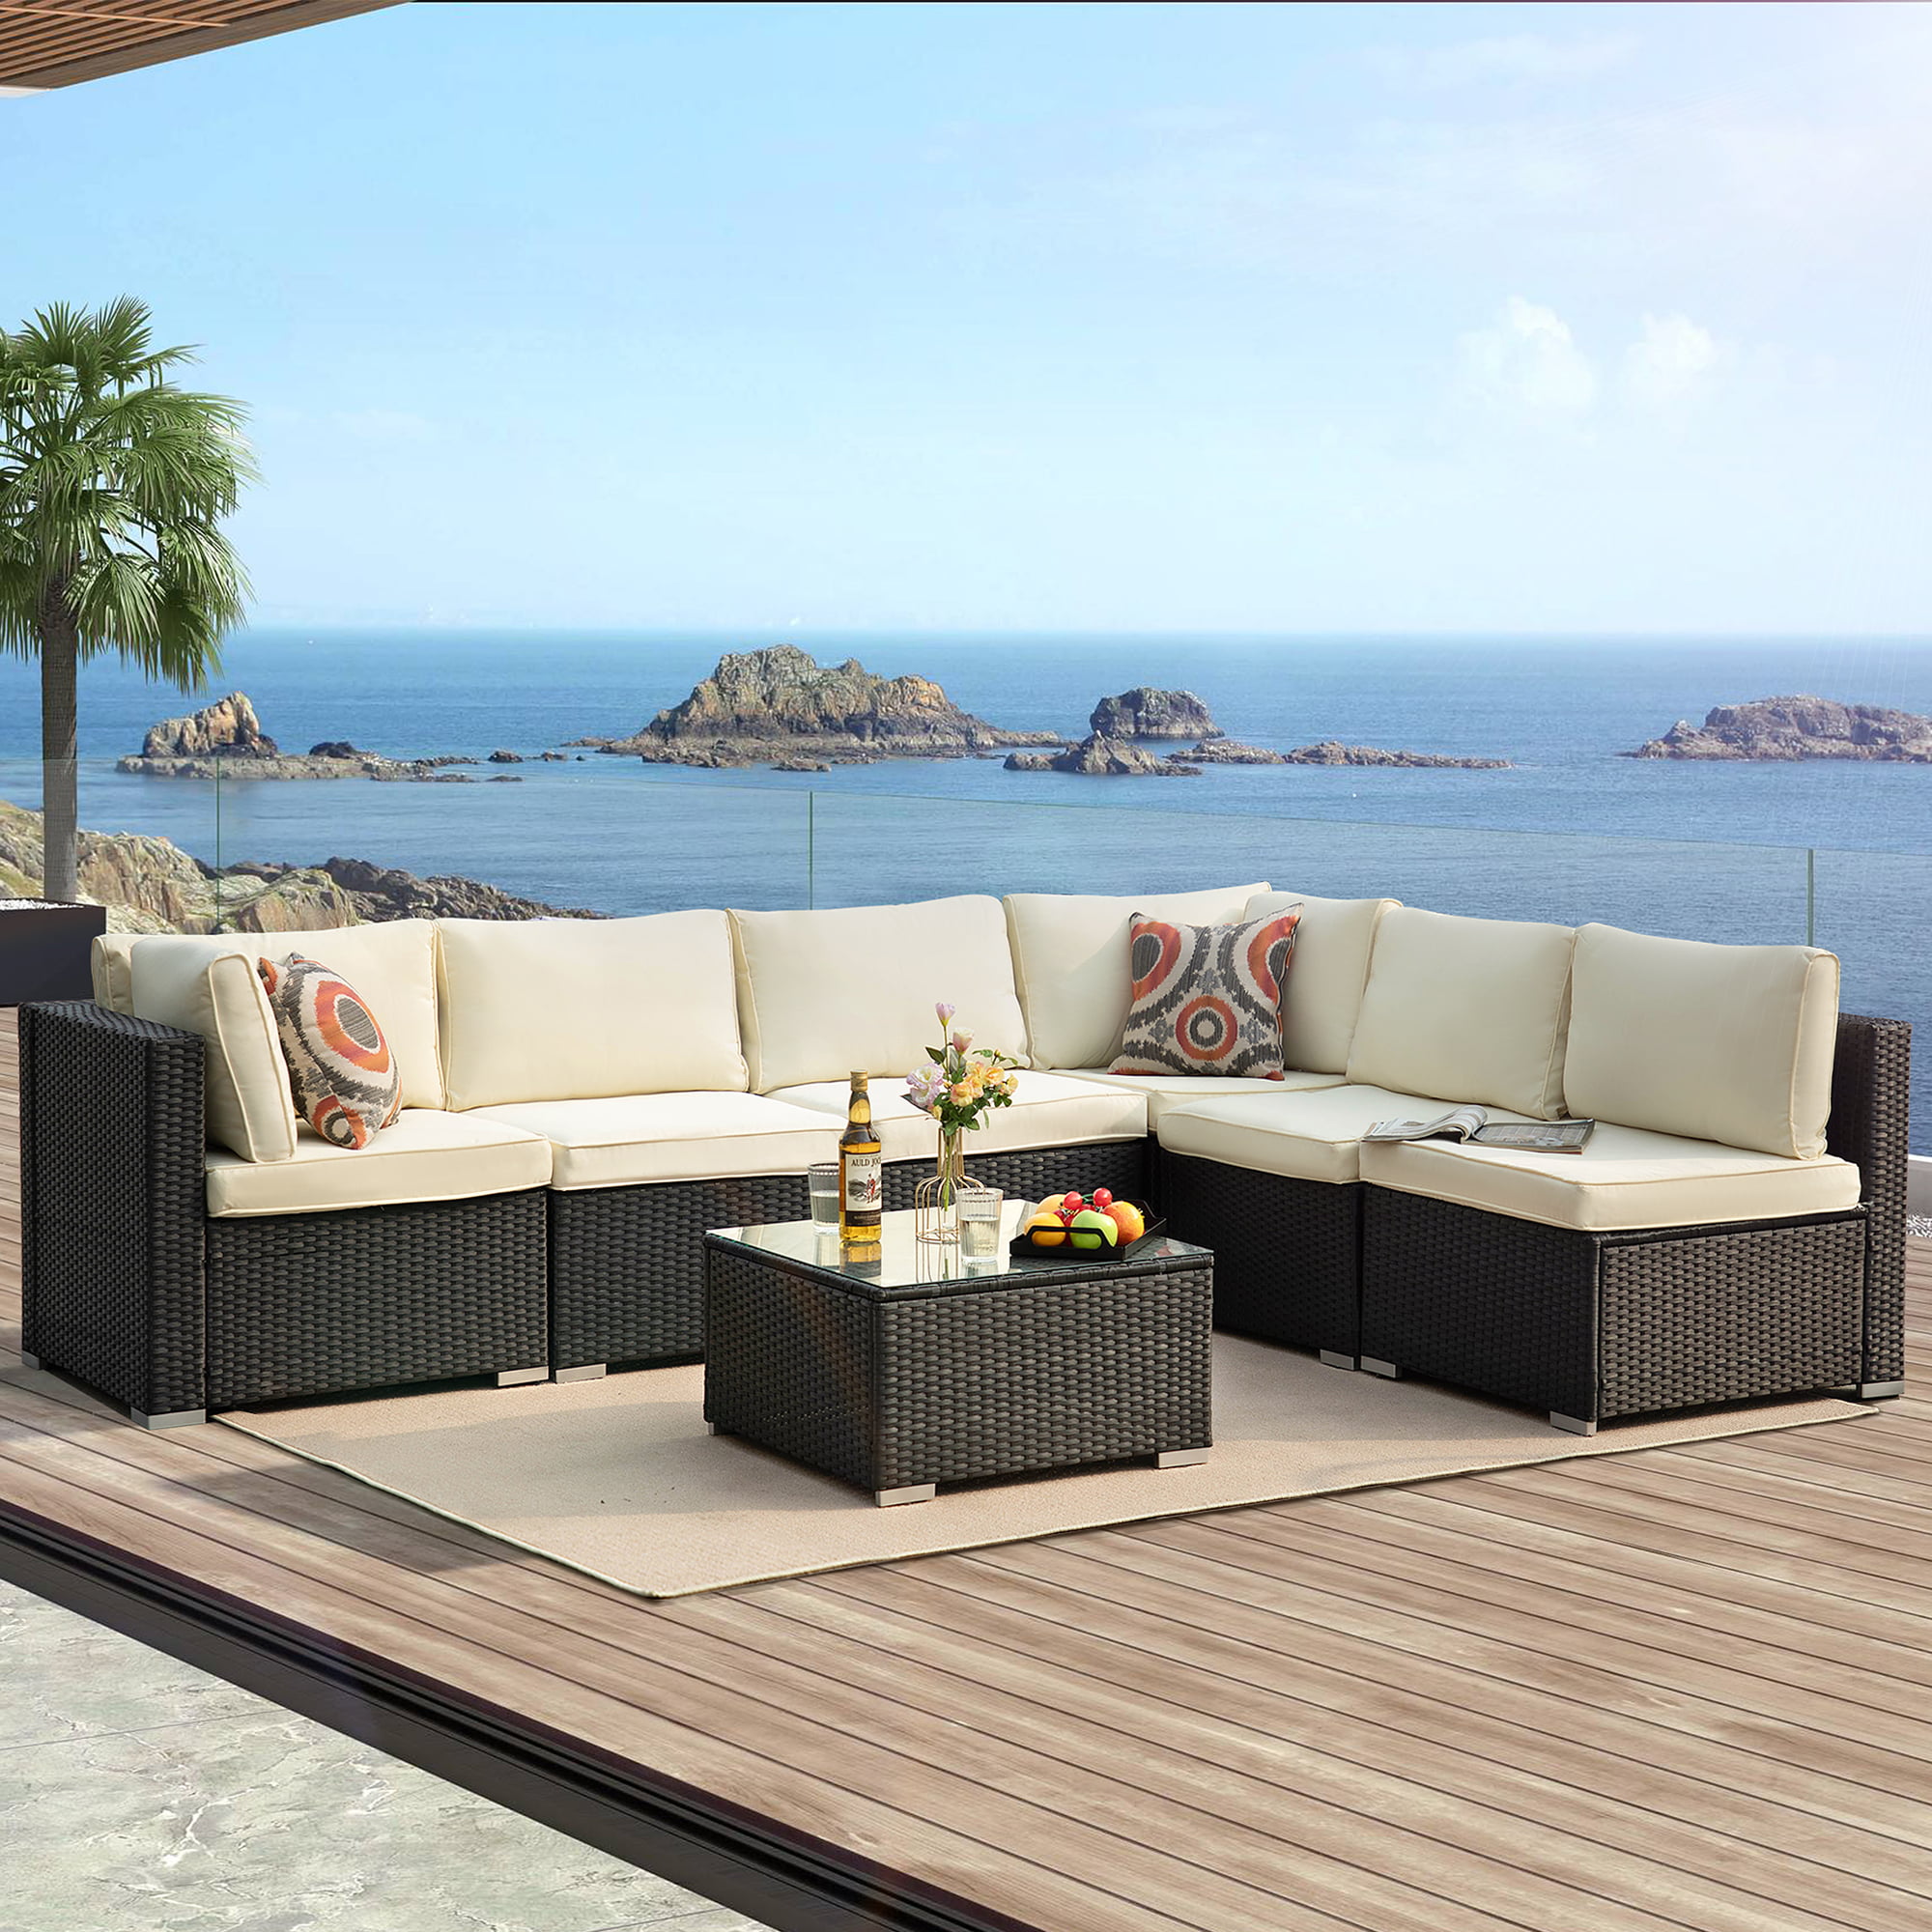 Brown Halmuz Outdoor Patio Set The New 7 Piece Patio Sectional Sofa Have PE Wicker Patio Sofa with Thickened Cushions and Coffee Table 